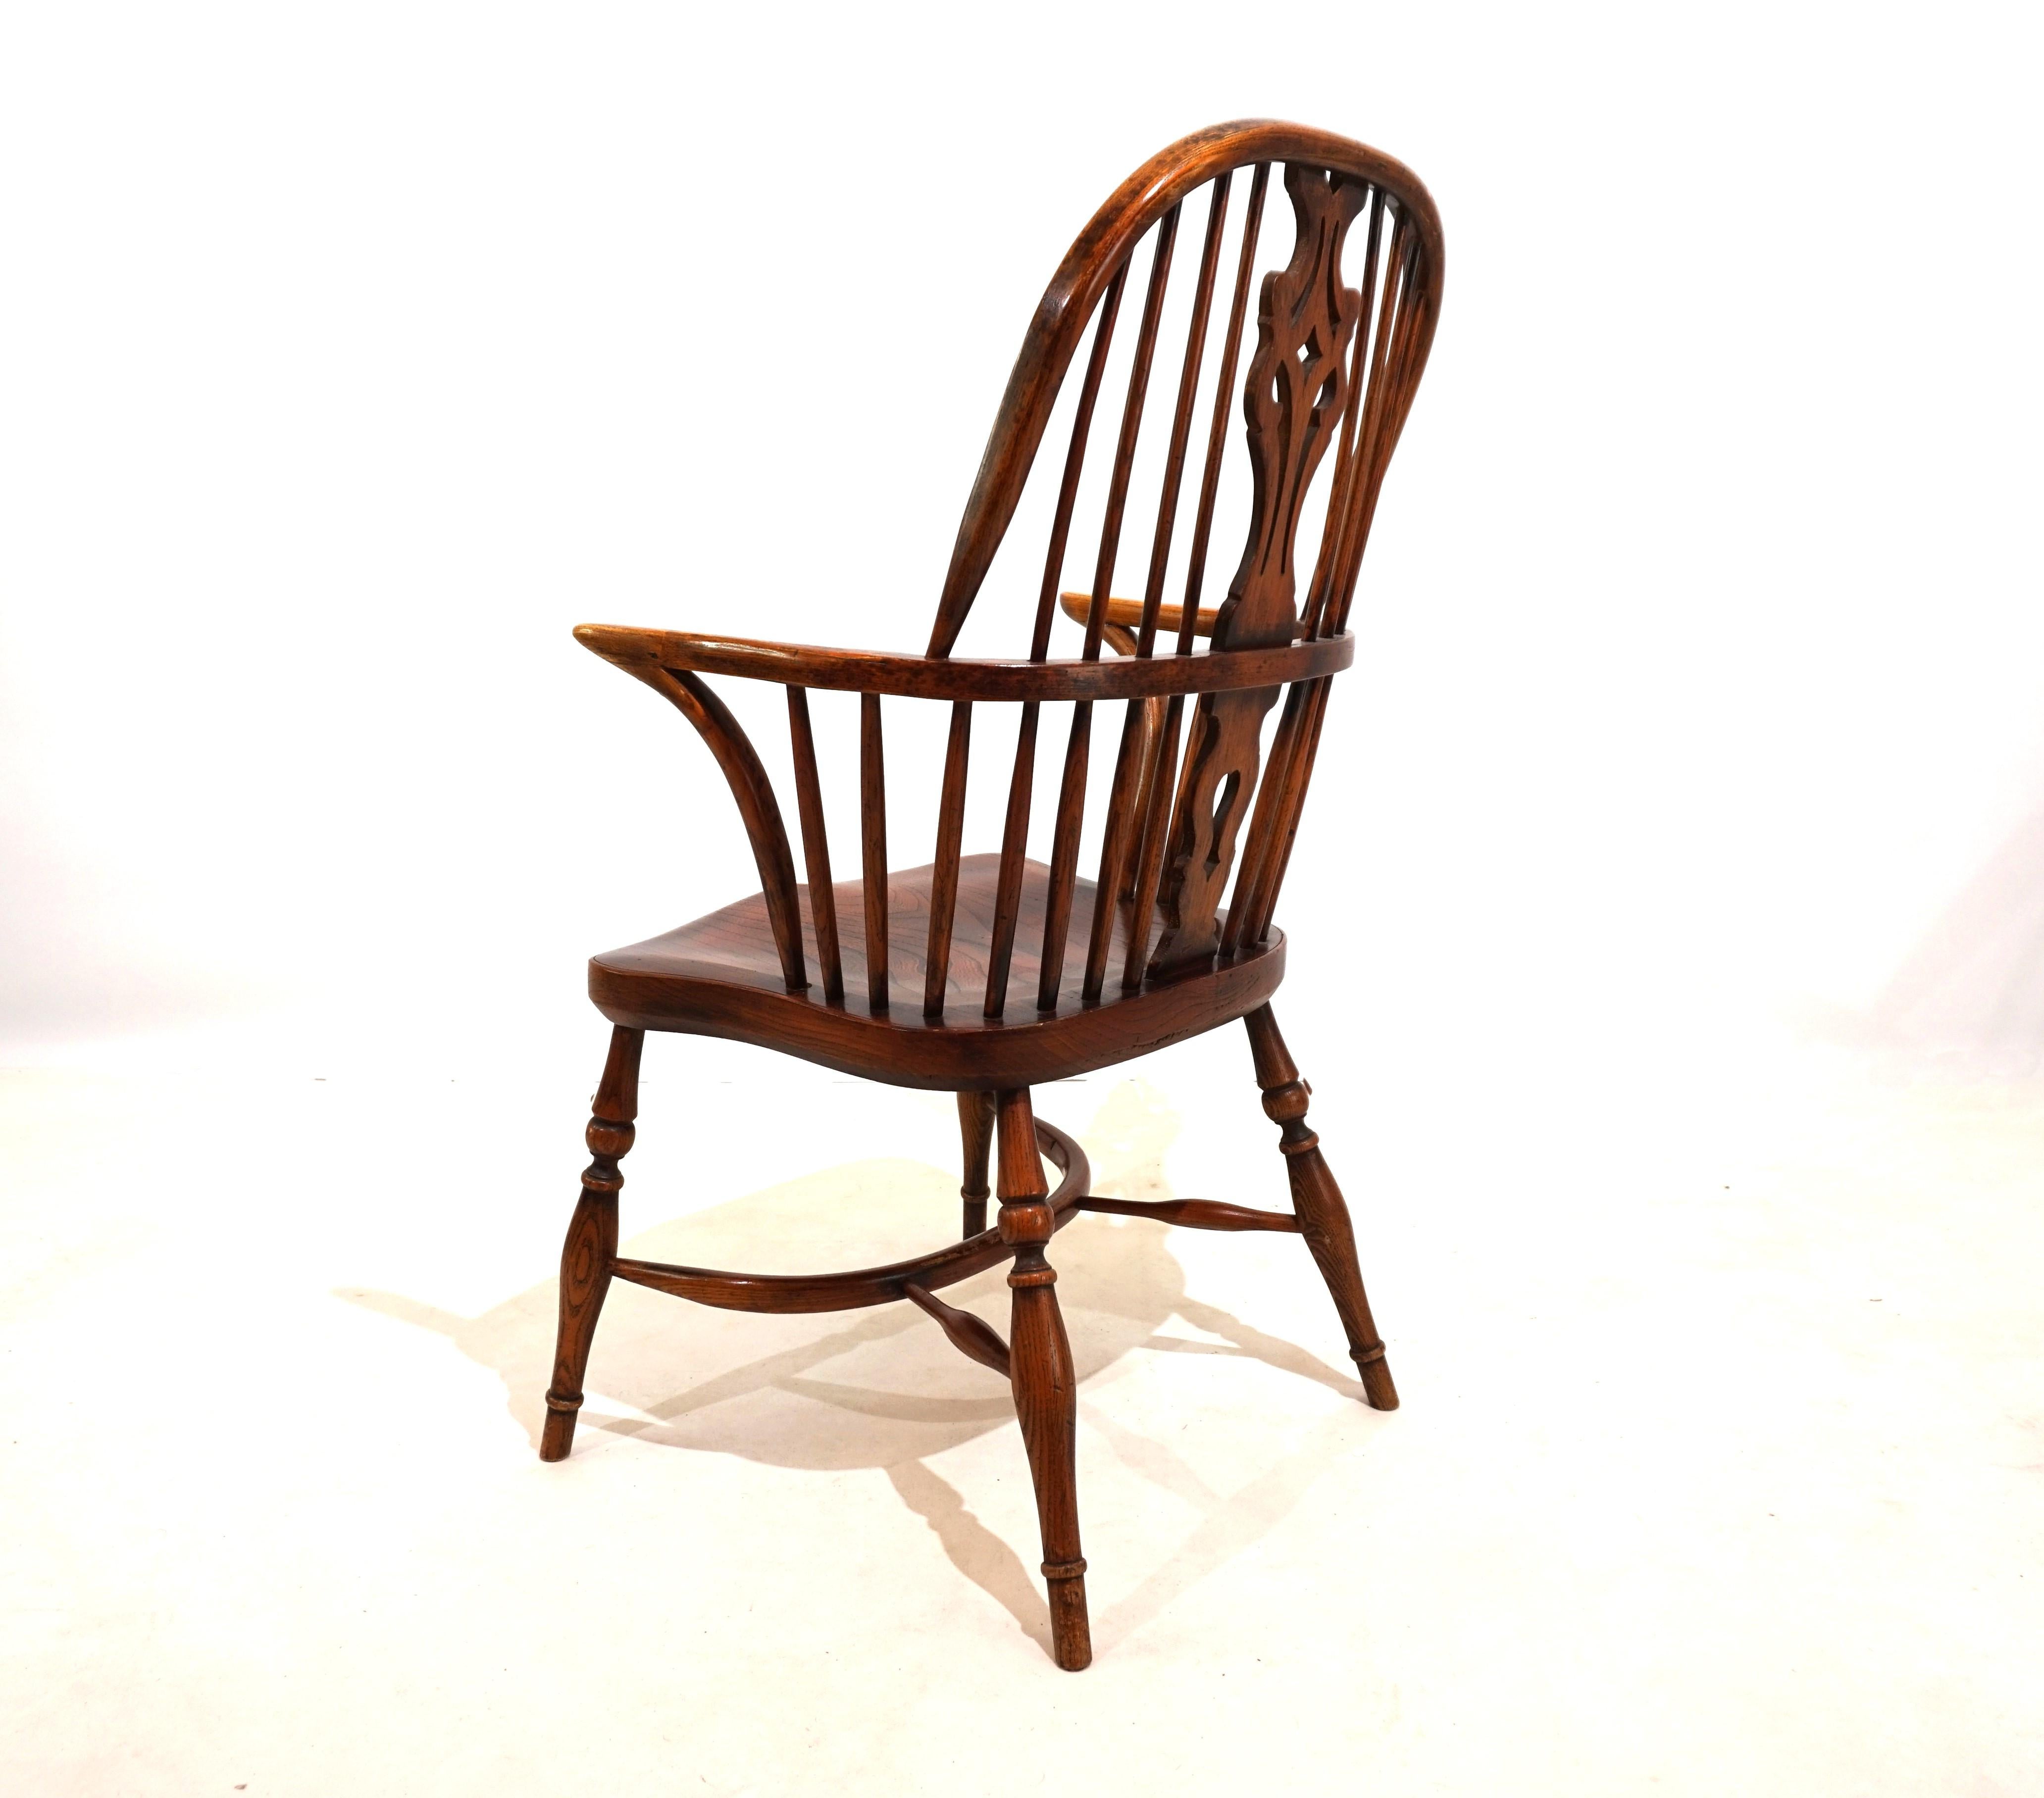 This Windsor chair in the armchair version with backrests is in very good condition with a fantastic patina of age. The design element of the backrest and the simple and delicate struts give the chair an exclusive appearance. Over the years, this